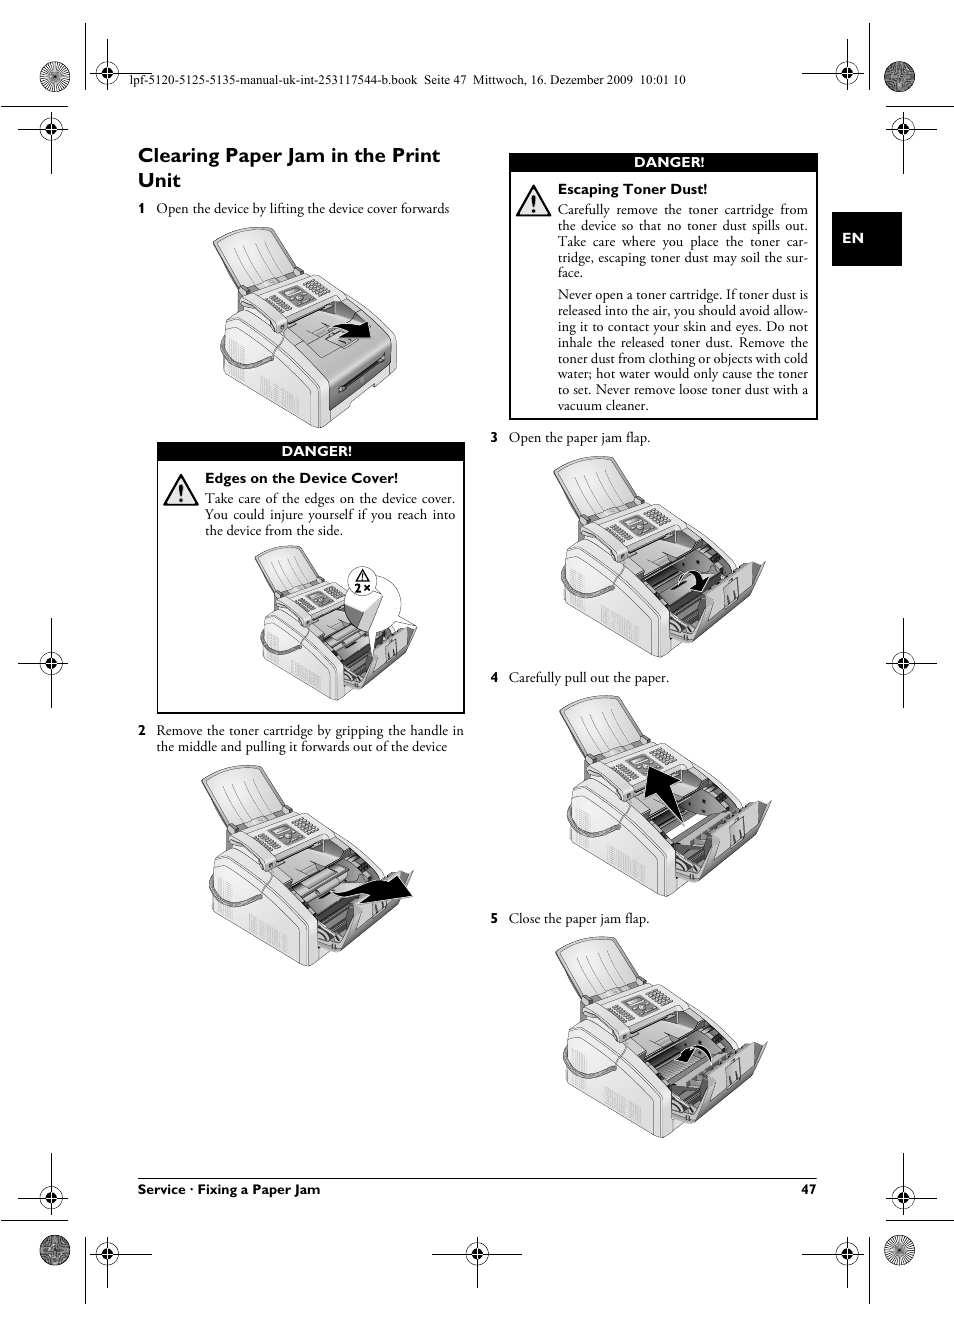 Clearing paper jam in the print unit | Philips Laserfax LPF 5120 User  Manual | Page 47 / 68 | Original mode